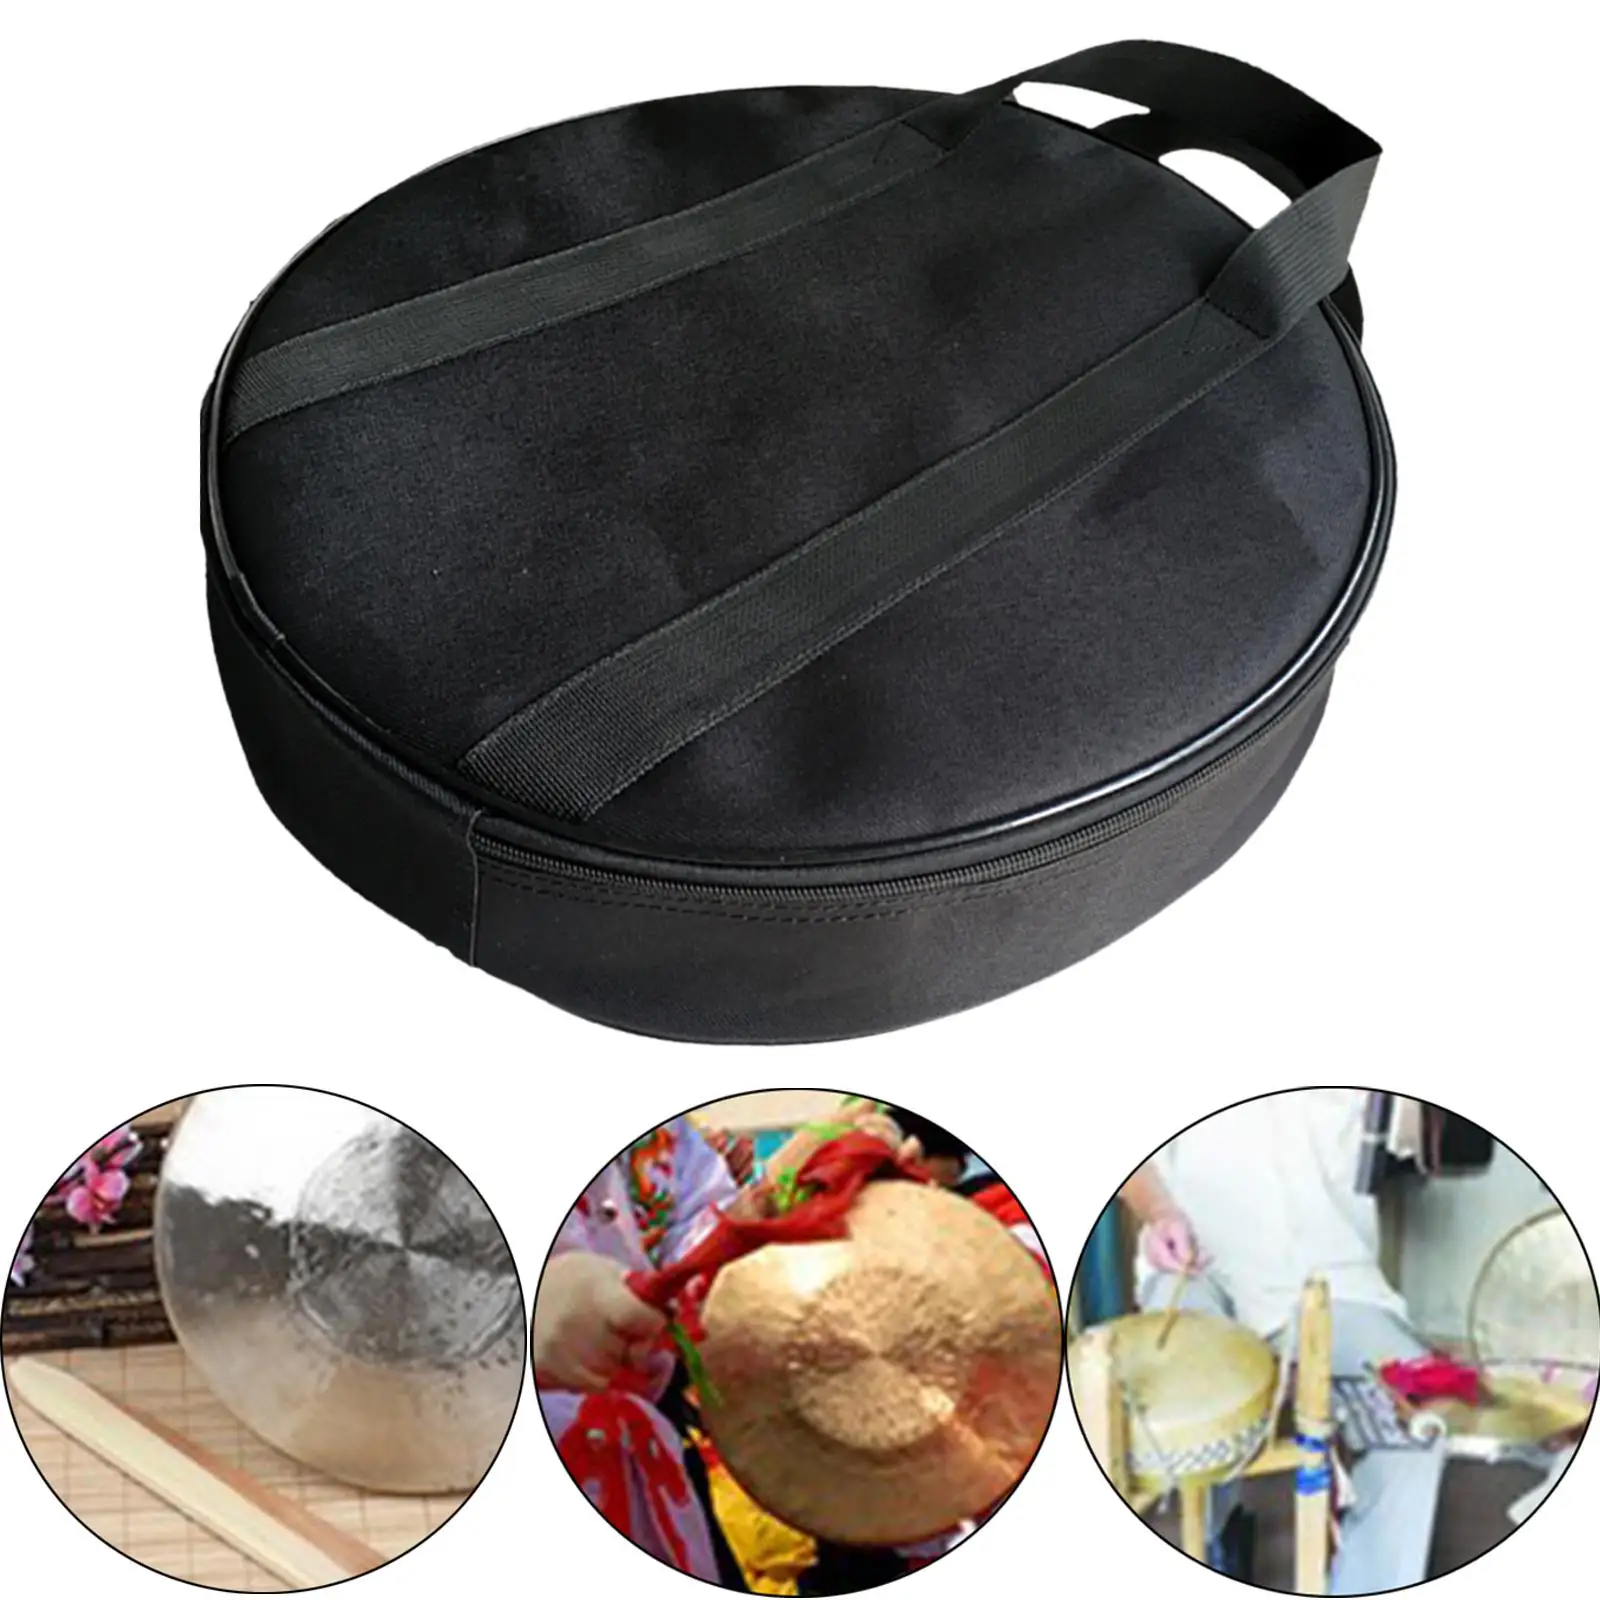 Cymbal Bag Thickened Cotton Support Dust Proof with Carry Handle Hardware